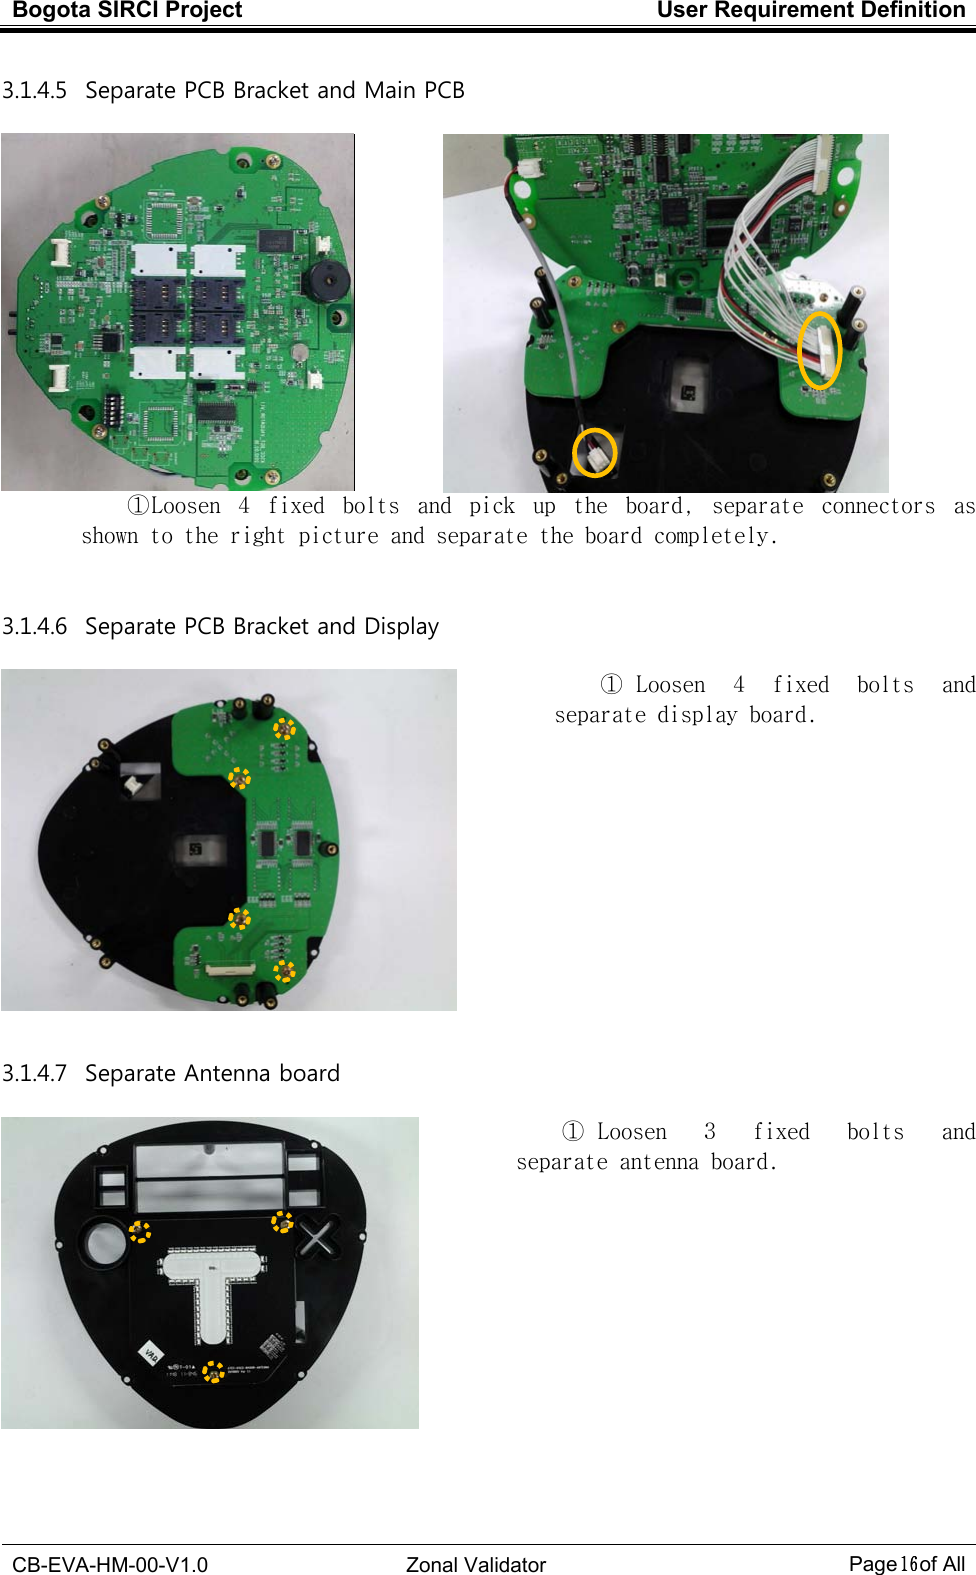 Bogota SIRCI Project  User Requirement Definition  CB-EVA-HM-00-V1.0  Zonal Validator Page１６１６１６１６ of All  3.1.4.5   Separate PCB Bracket and Main PCB     ① Loosen  4  fixed  bolts  and  pick  up  the  board,  separate  connectors  as shown to the right picture and separate the board completely.  3.1.4.6   Separate PCB Bracket and Display   ①  Loosen  4  fixed  bolts  and separate display board.             3.1.4.7   Separate Antenna board   ①  Loosen  3  fixed  bolts  and separate antenna board. 